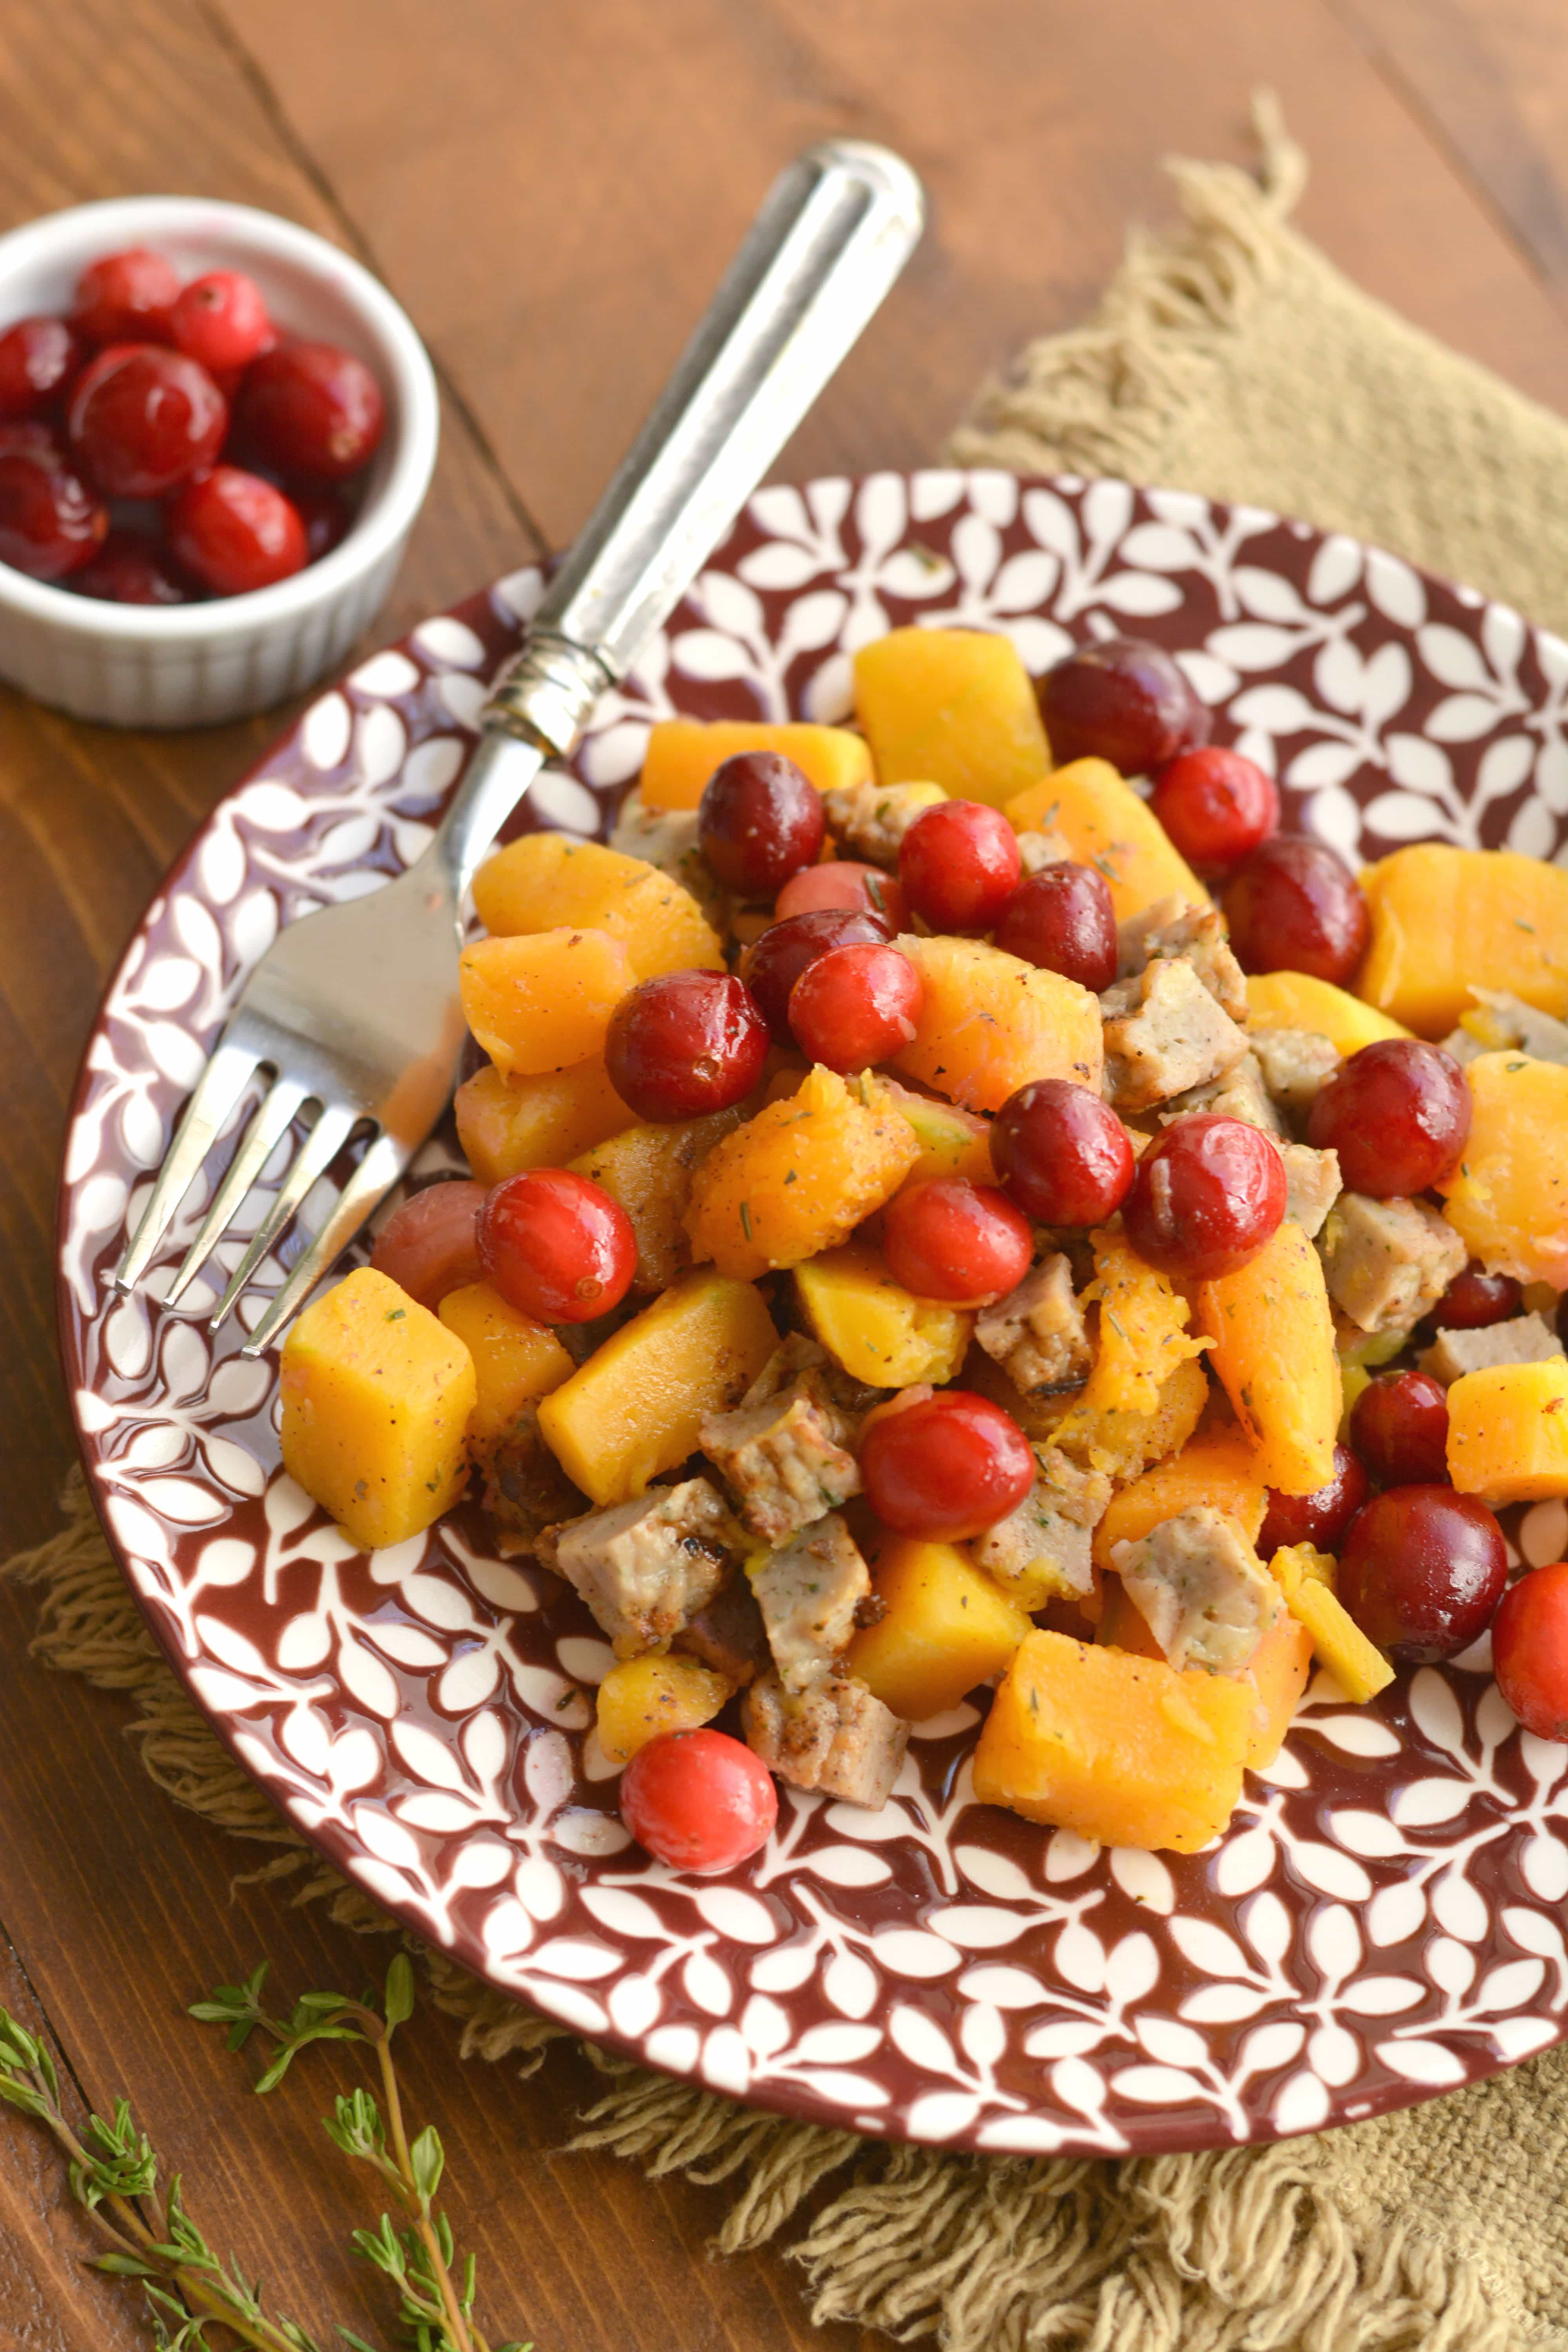 Butternut Squash and Cranberry Skillet Meal Prep Idea